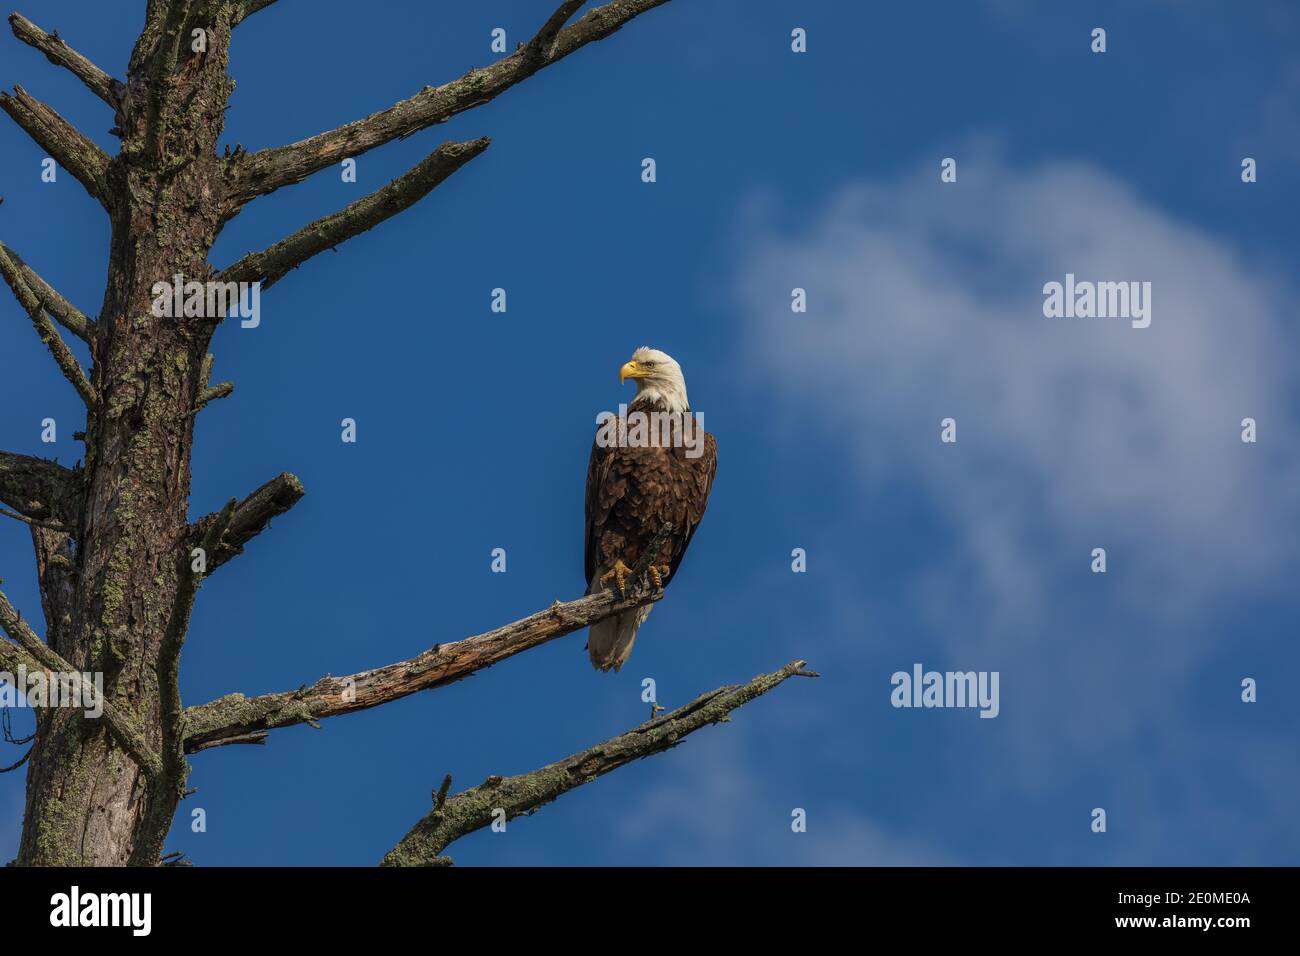 Bald eagle perched on a snag in northern Wisconsin. Stock Photo